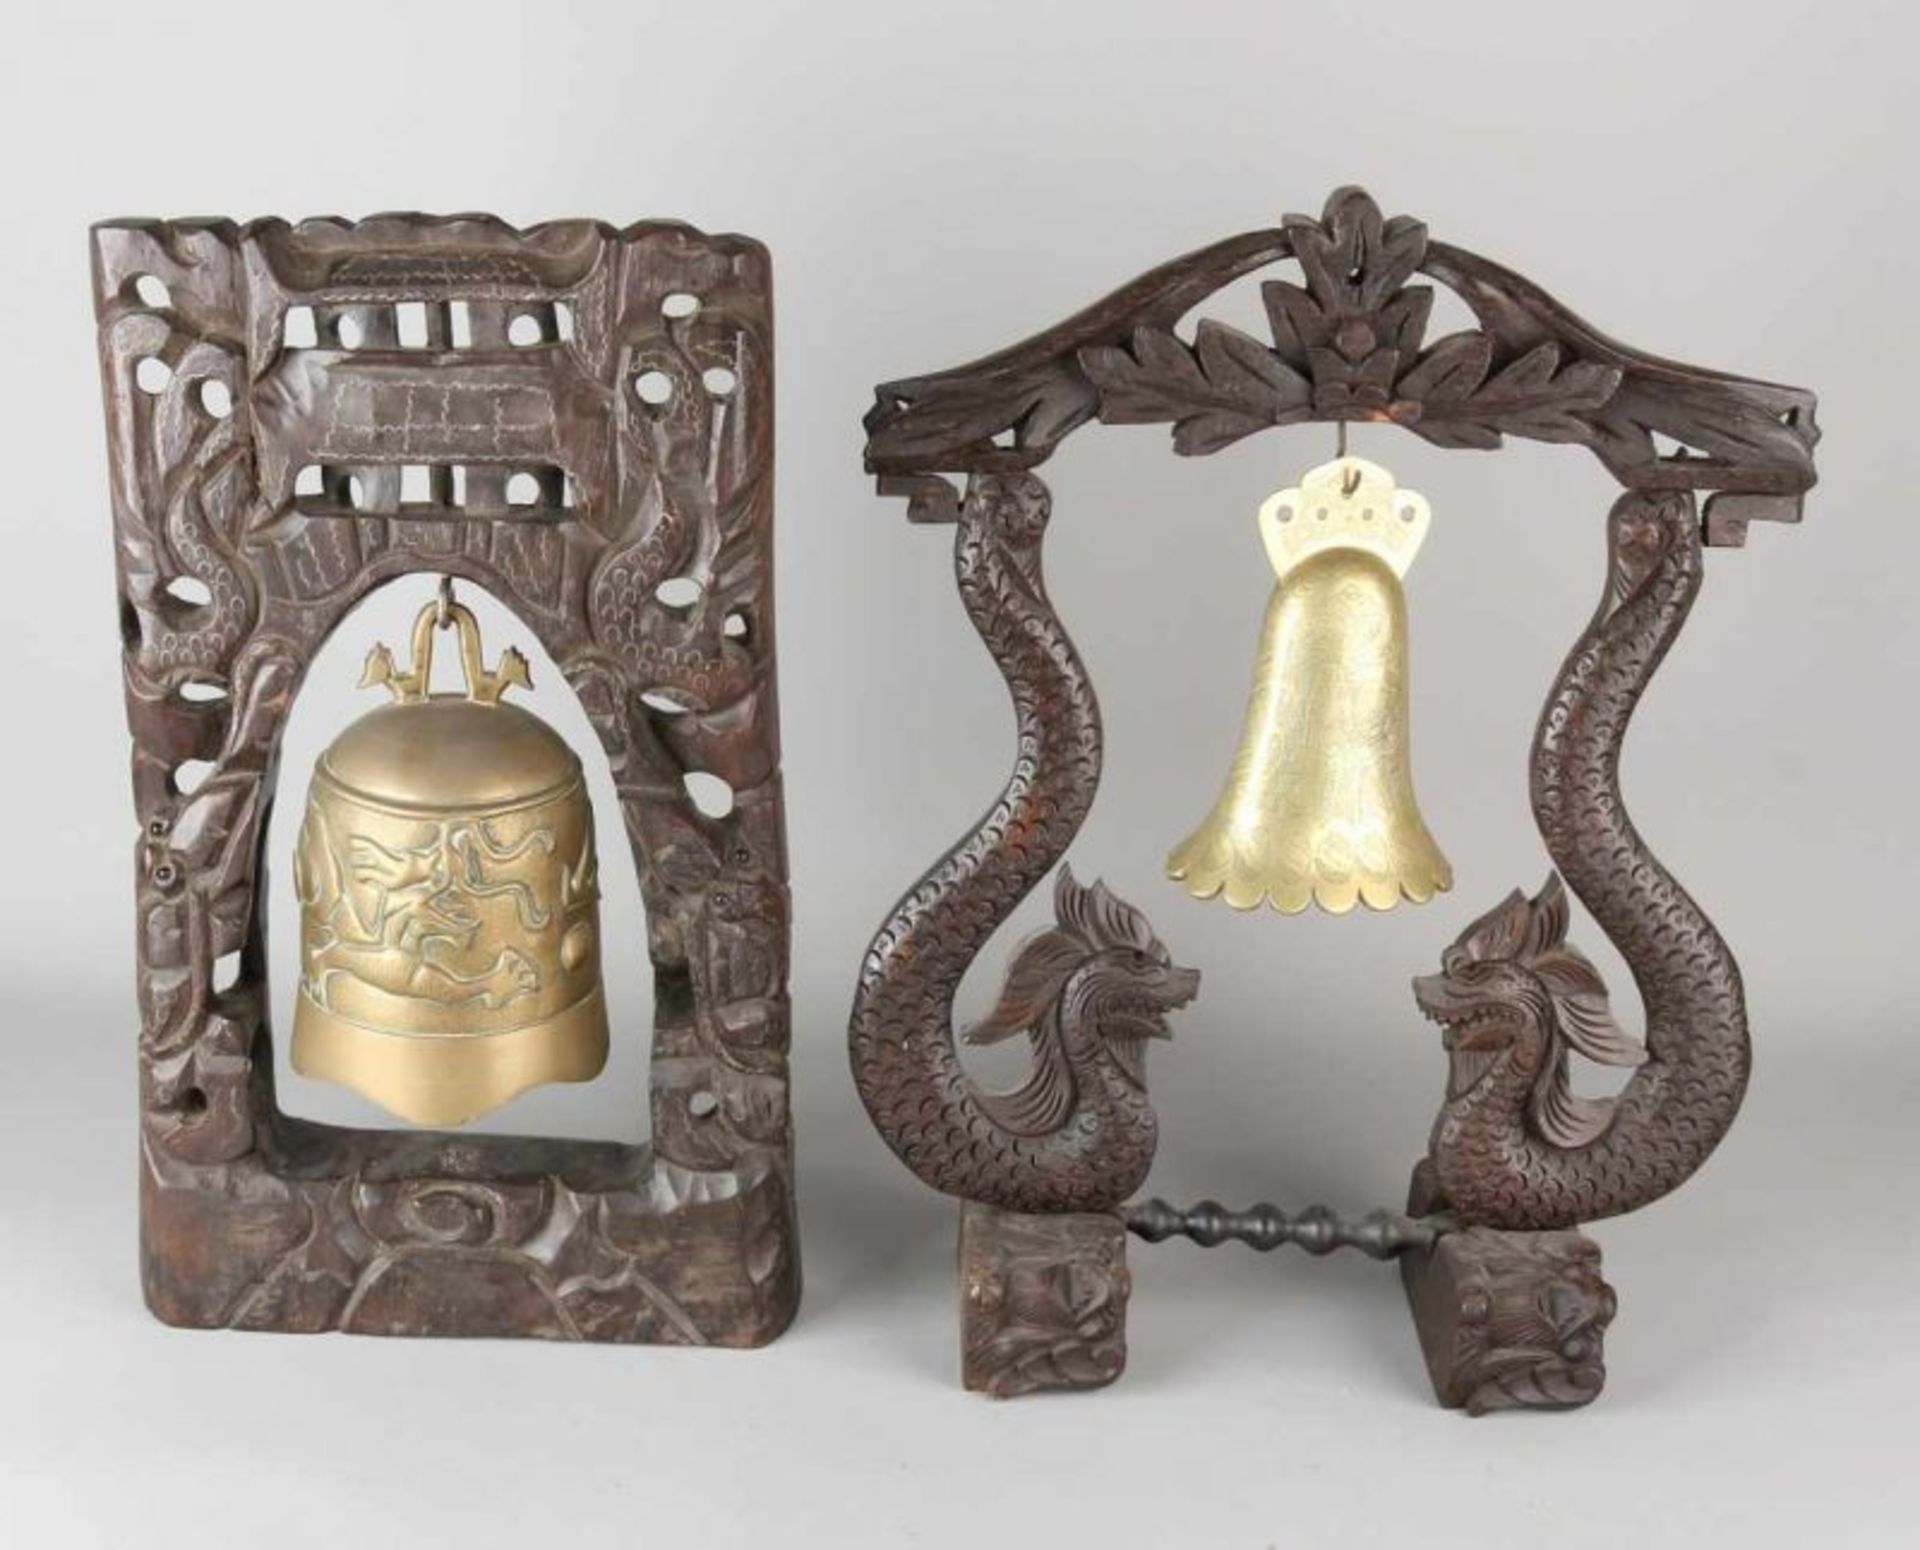 Two Asian bronze table bells with carvings. 20th century. Dimensions: 43 - 45 cm. In good